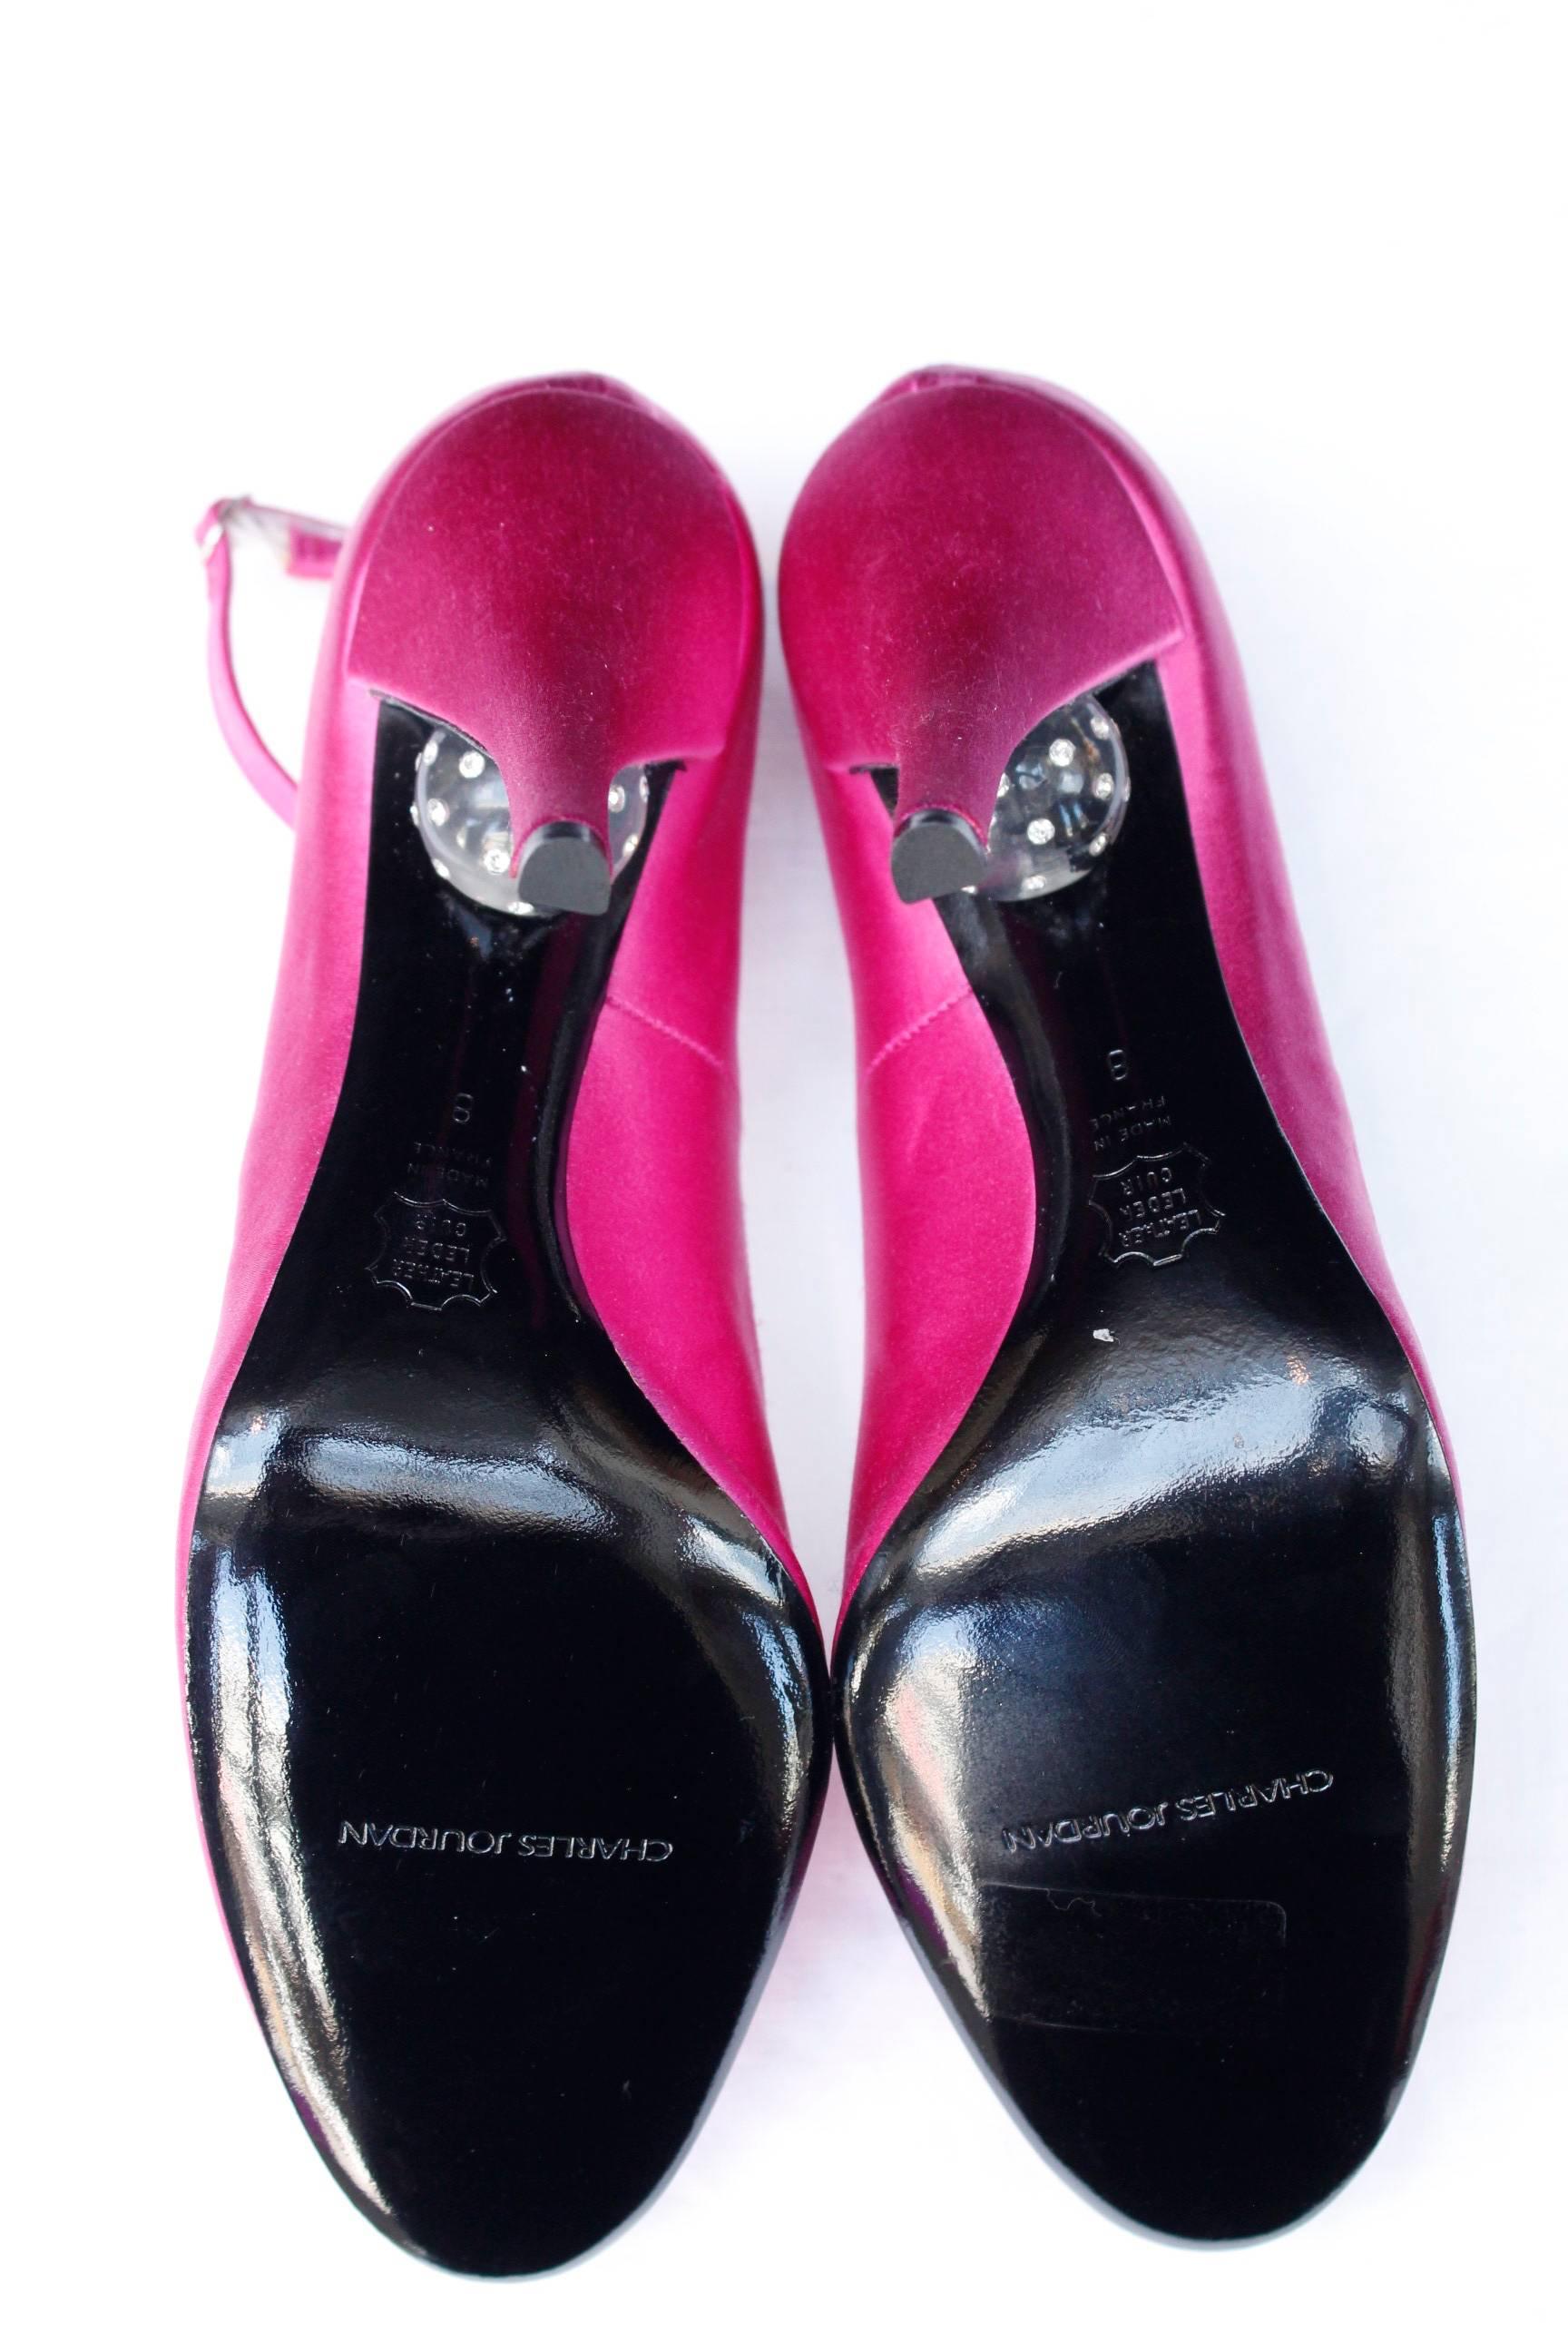 Charles Jourdan fuchsia satin pumps decorated with a transparent sphere. 1